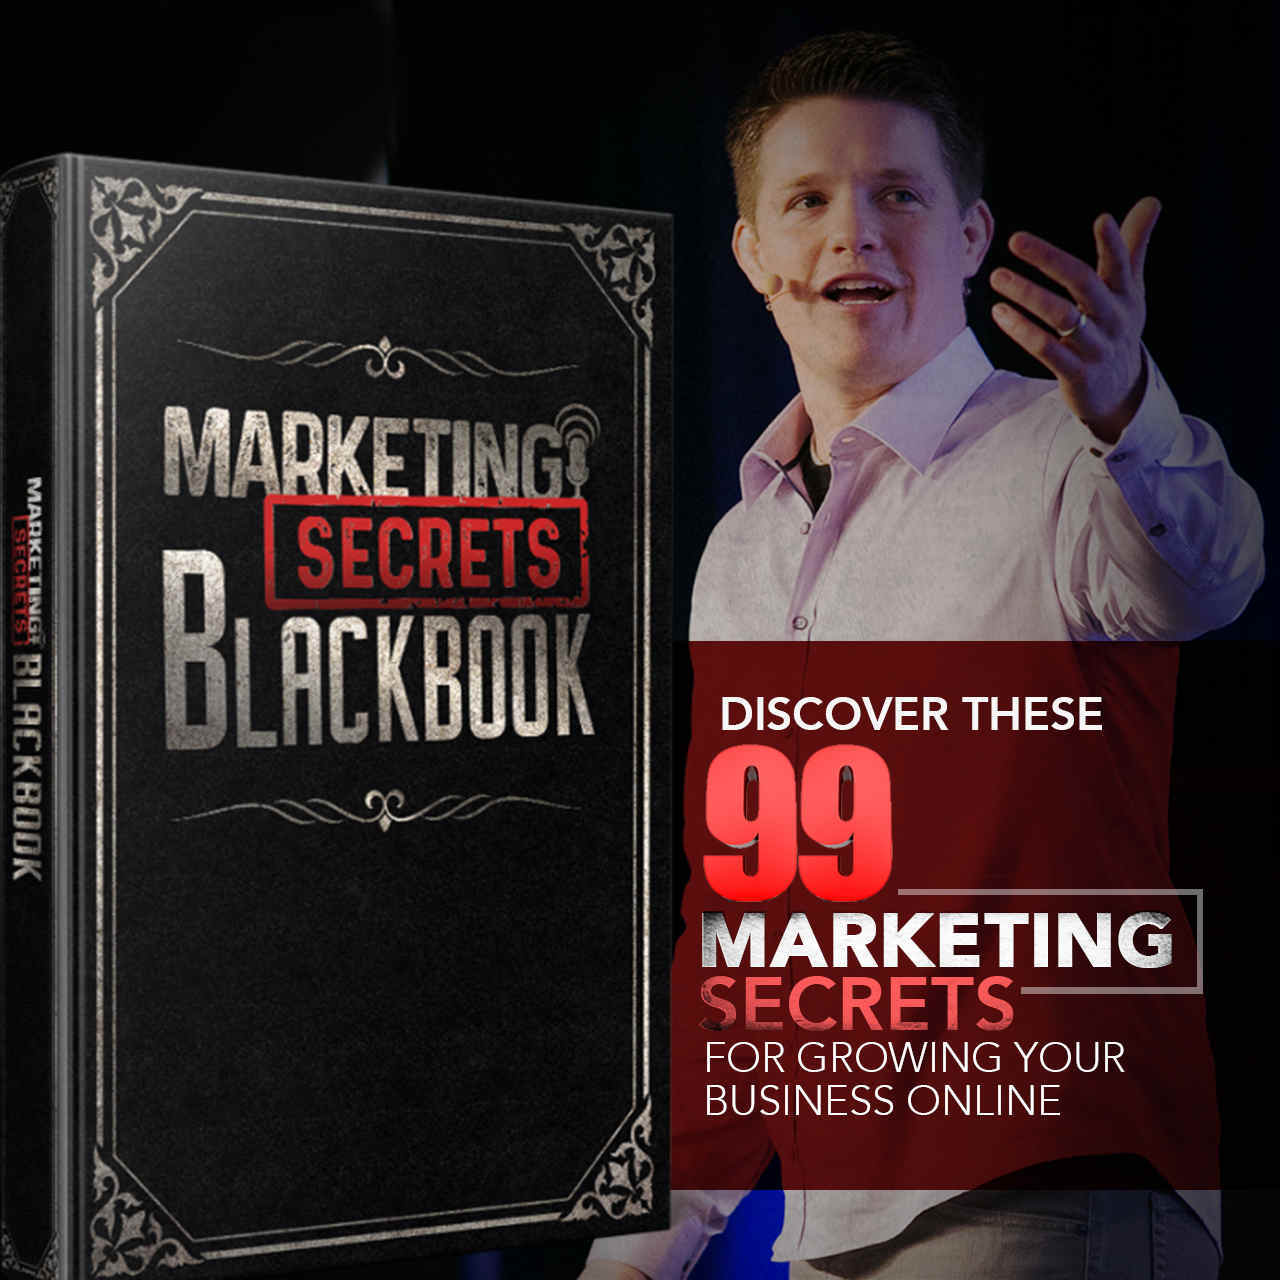 ecover - discover these 99 marketing secrets for growing your business online